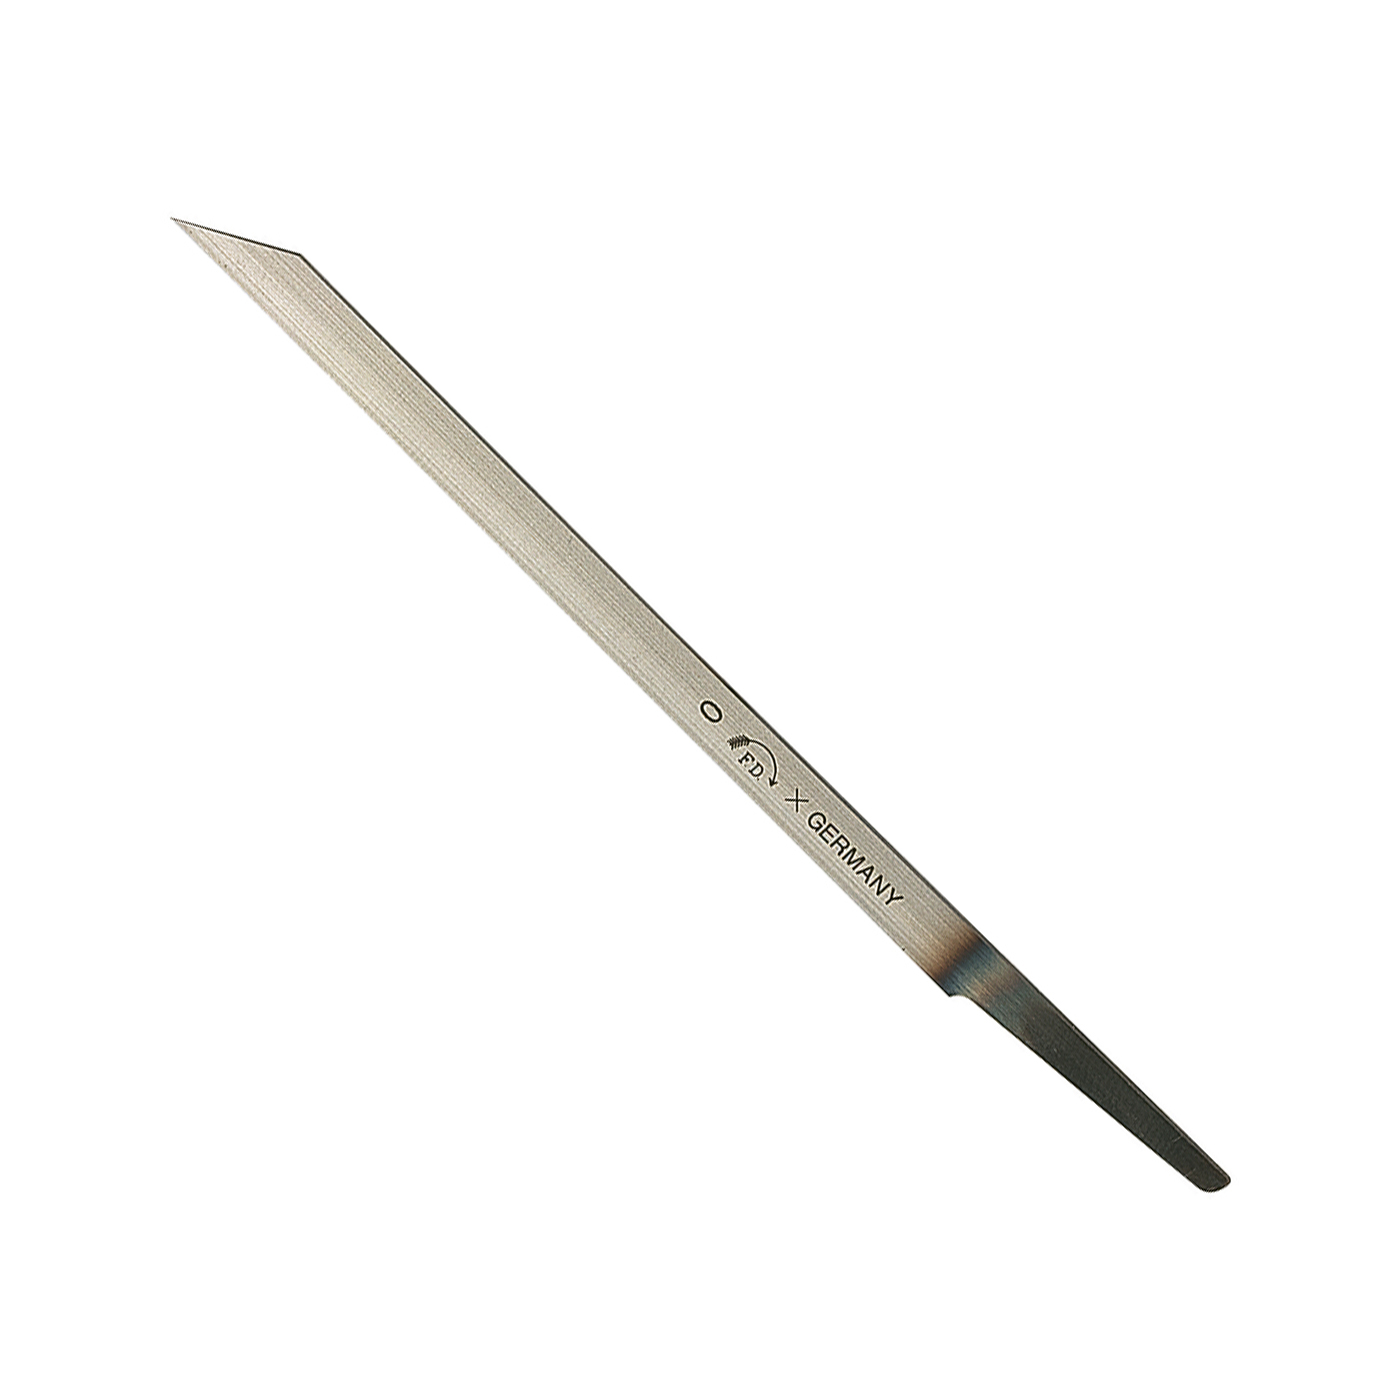 Pointed Graver, Size 0 - 1 piece